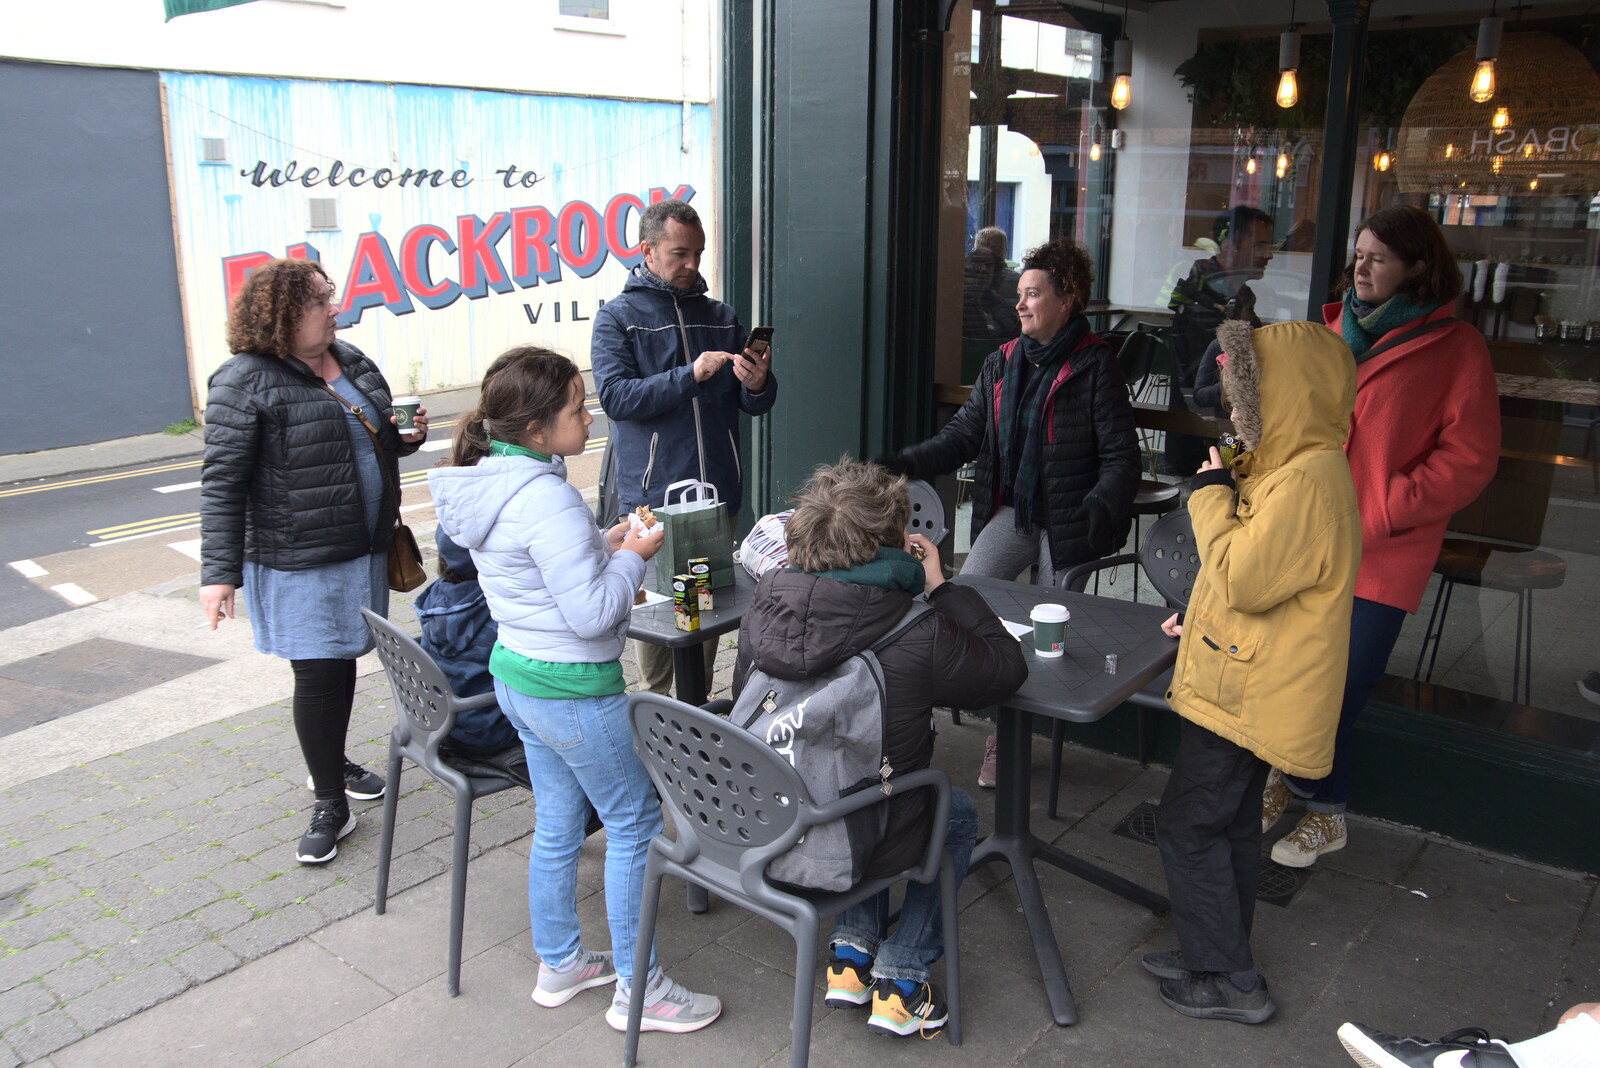 Blackrock North and South, Louth and County Dublin, Ireland - 23rd April 2022: We meet Da Gorls outside a café in Blackrock